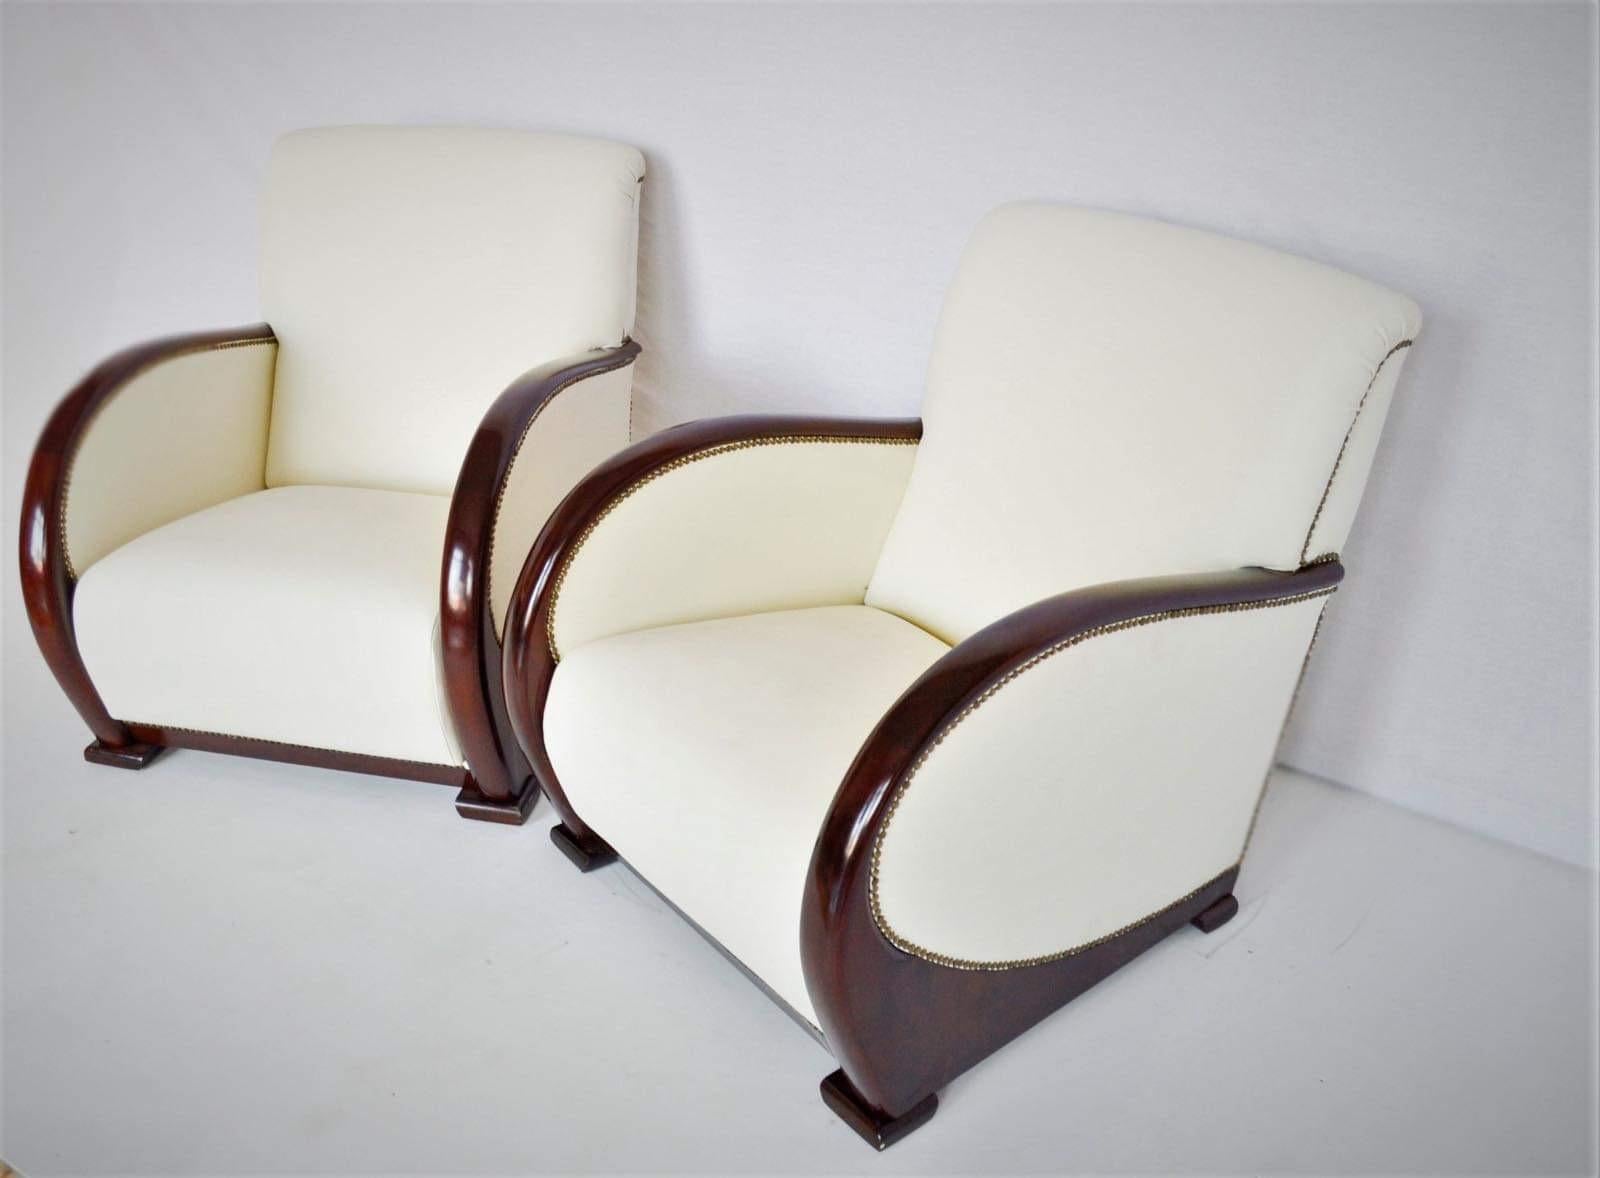 Copper Art Deco Sofa with Lounge Chairs, 1920, France For Sale